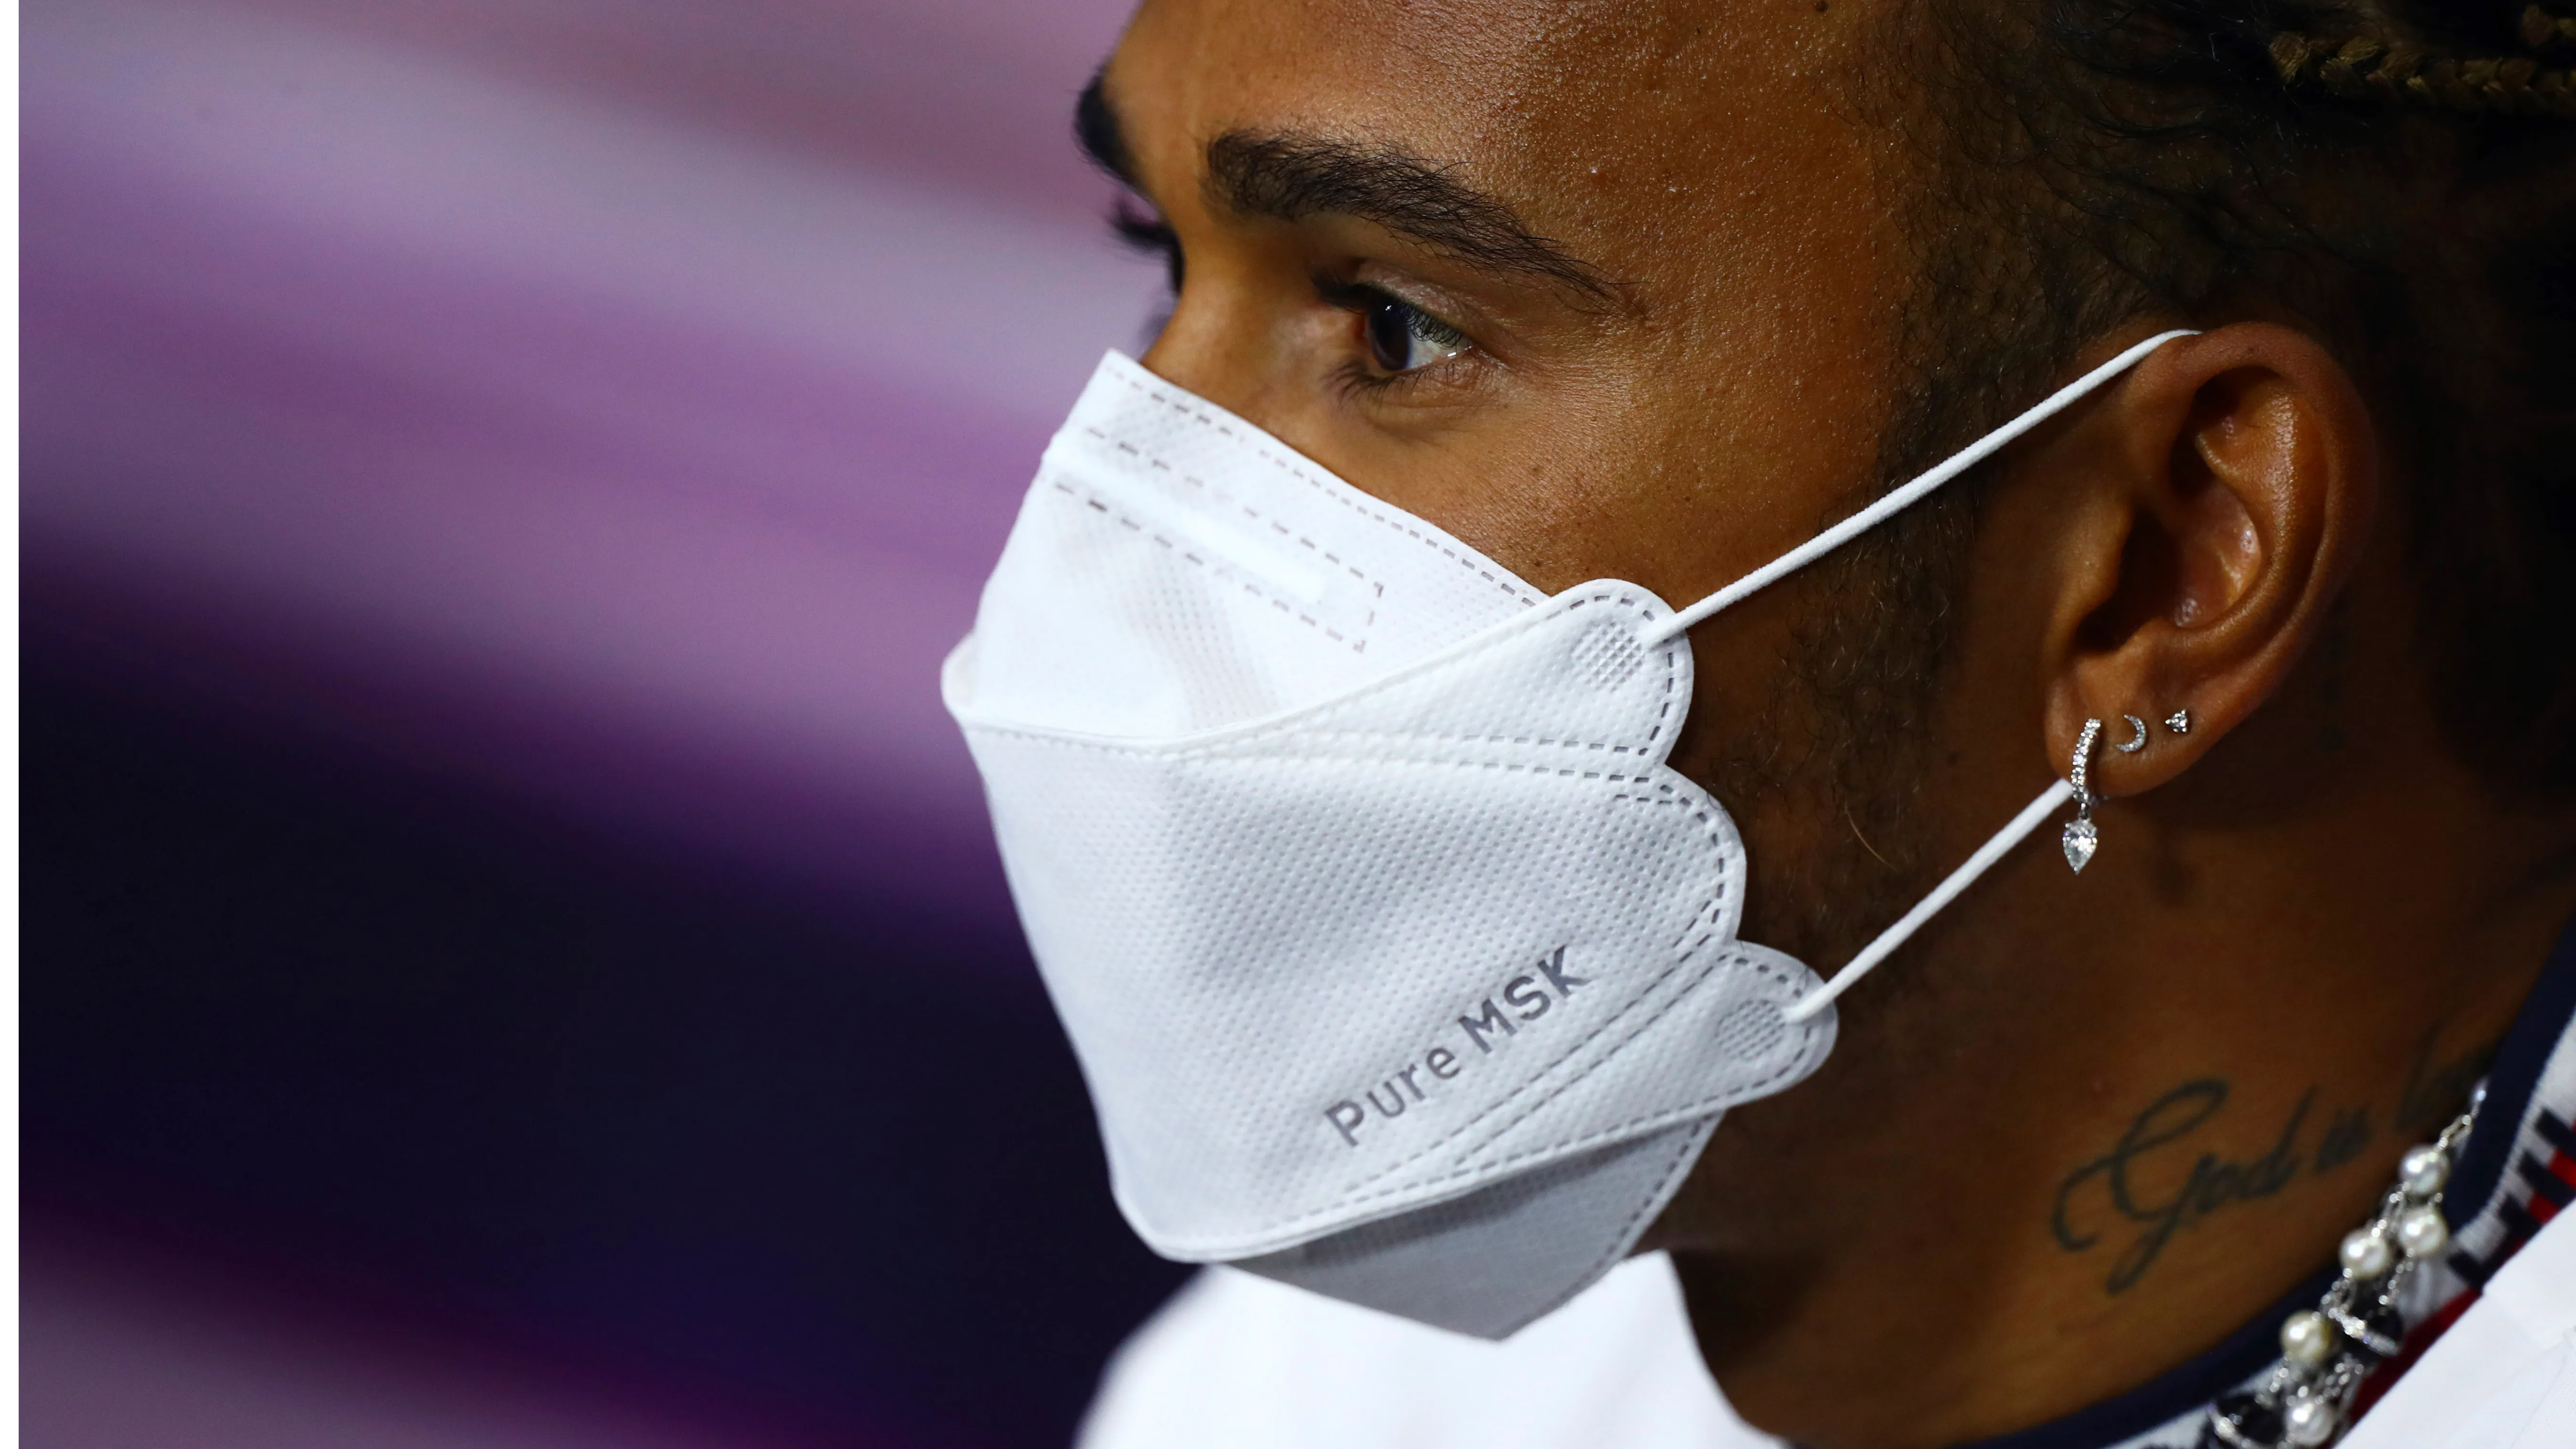 Lewis Hamilton ‘educates’ himself on alleged rights abuses in Bahrain